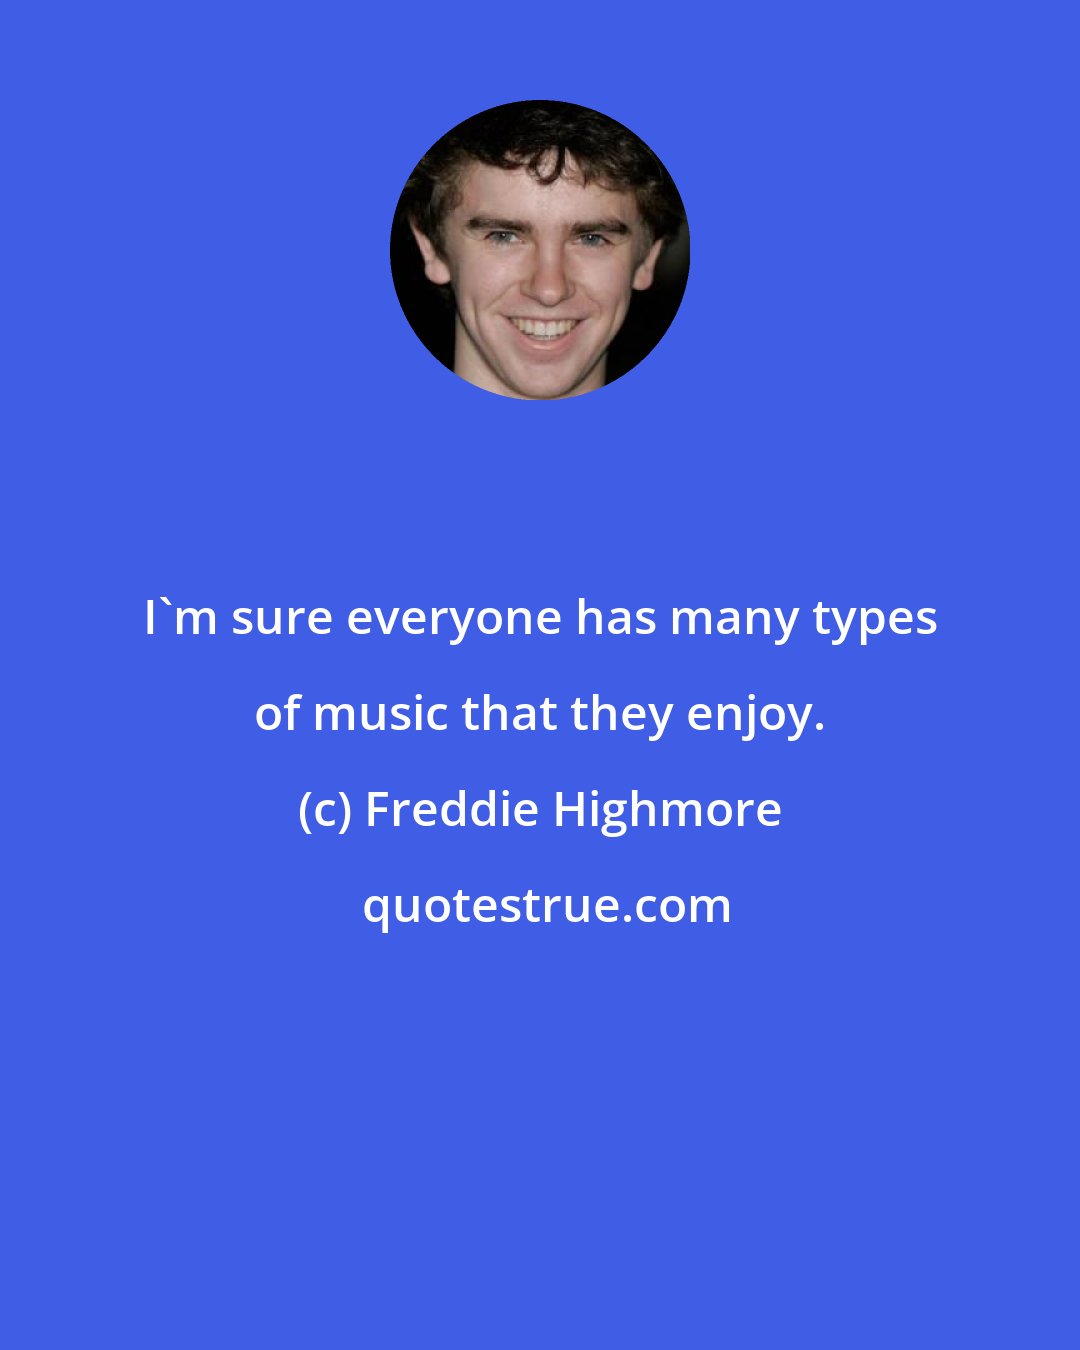 Freddie Highmore: I'm sure everyone has many types of music that they enjoy.